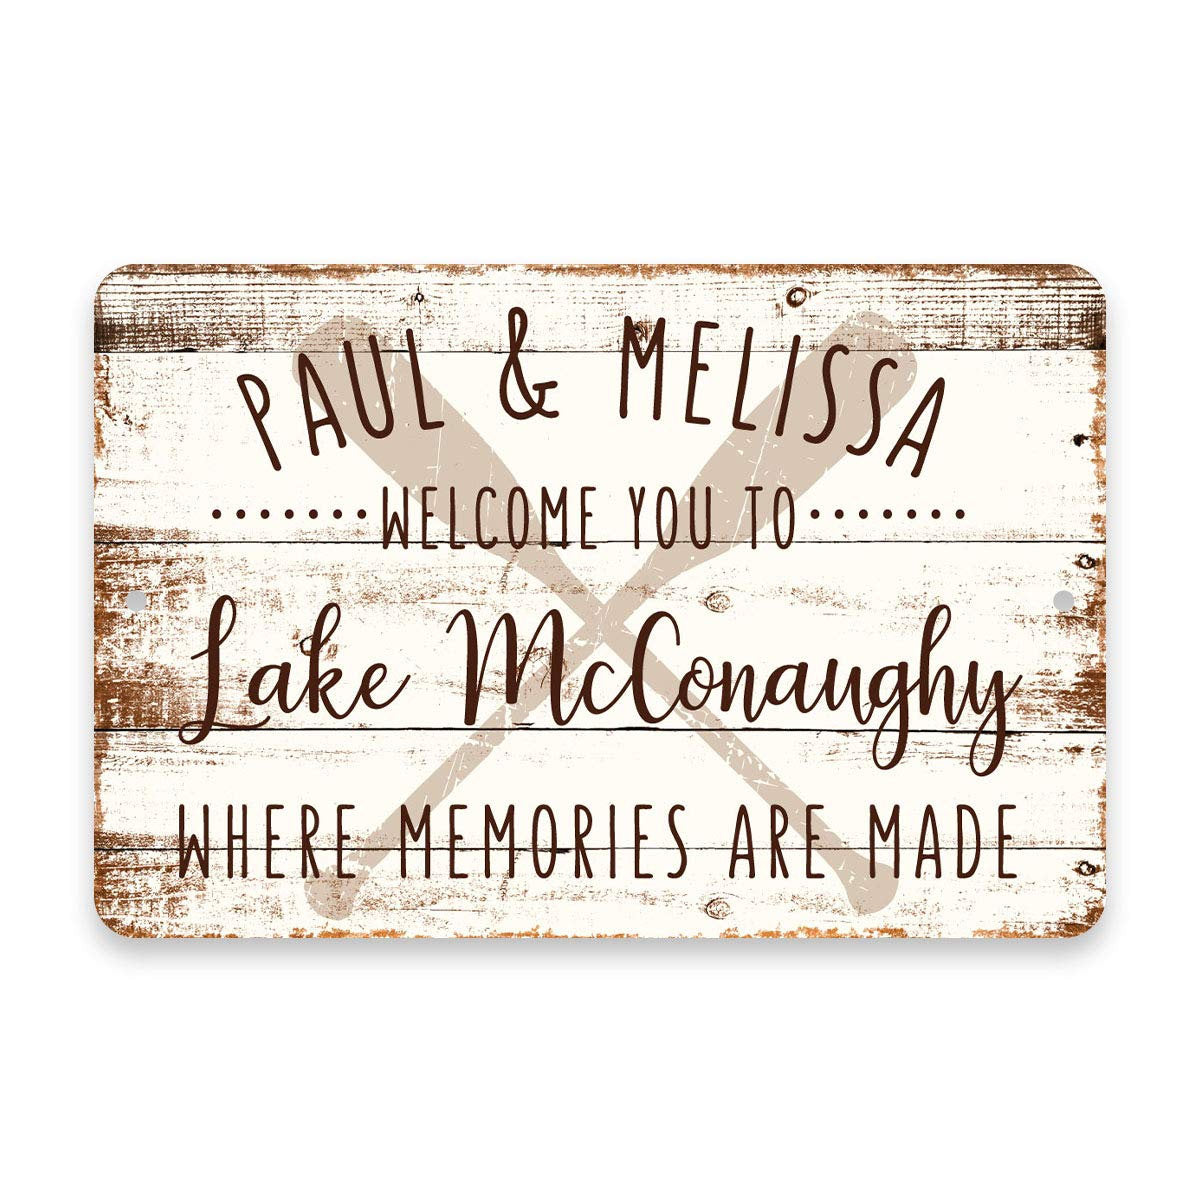 Personalized Welcome to Lake McConaughy Where Memories are Made Sign - 8 X 12 Metal Sign with Wood Look